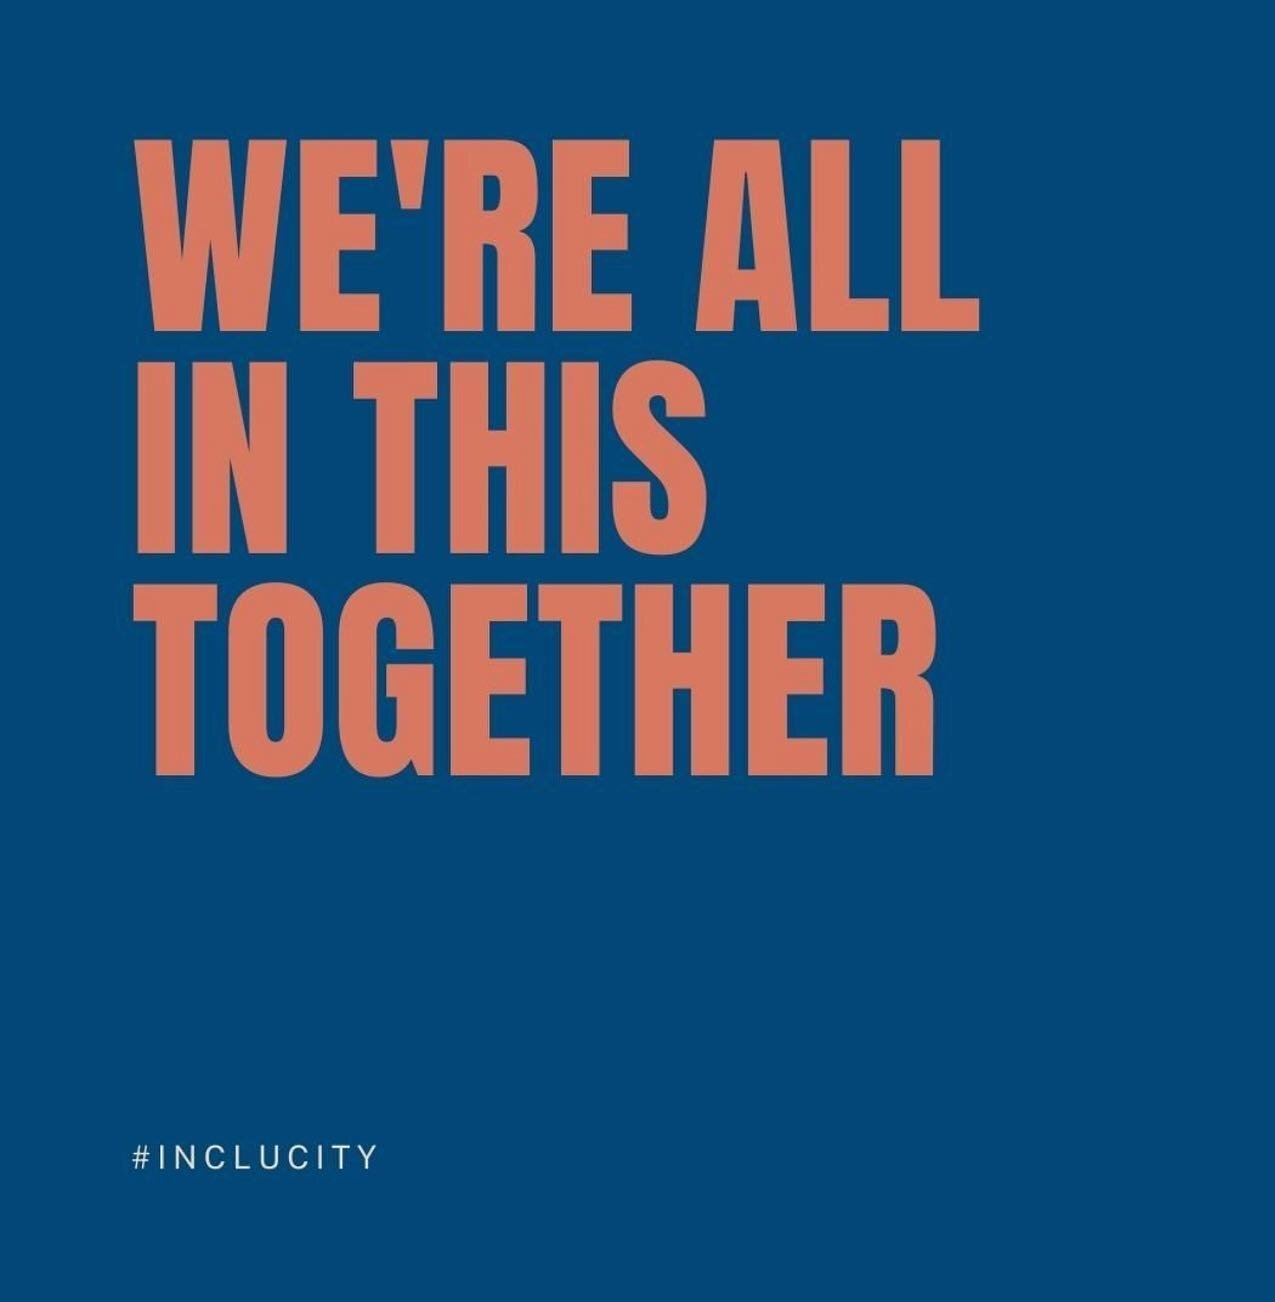 Building inclusive cities...one day at a time! #inclusionmatters #differentlikeyou #inclucity